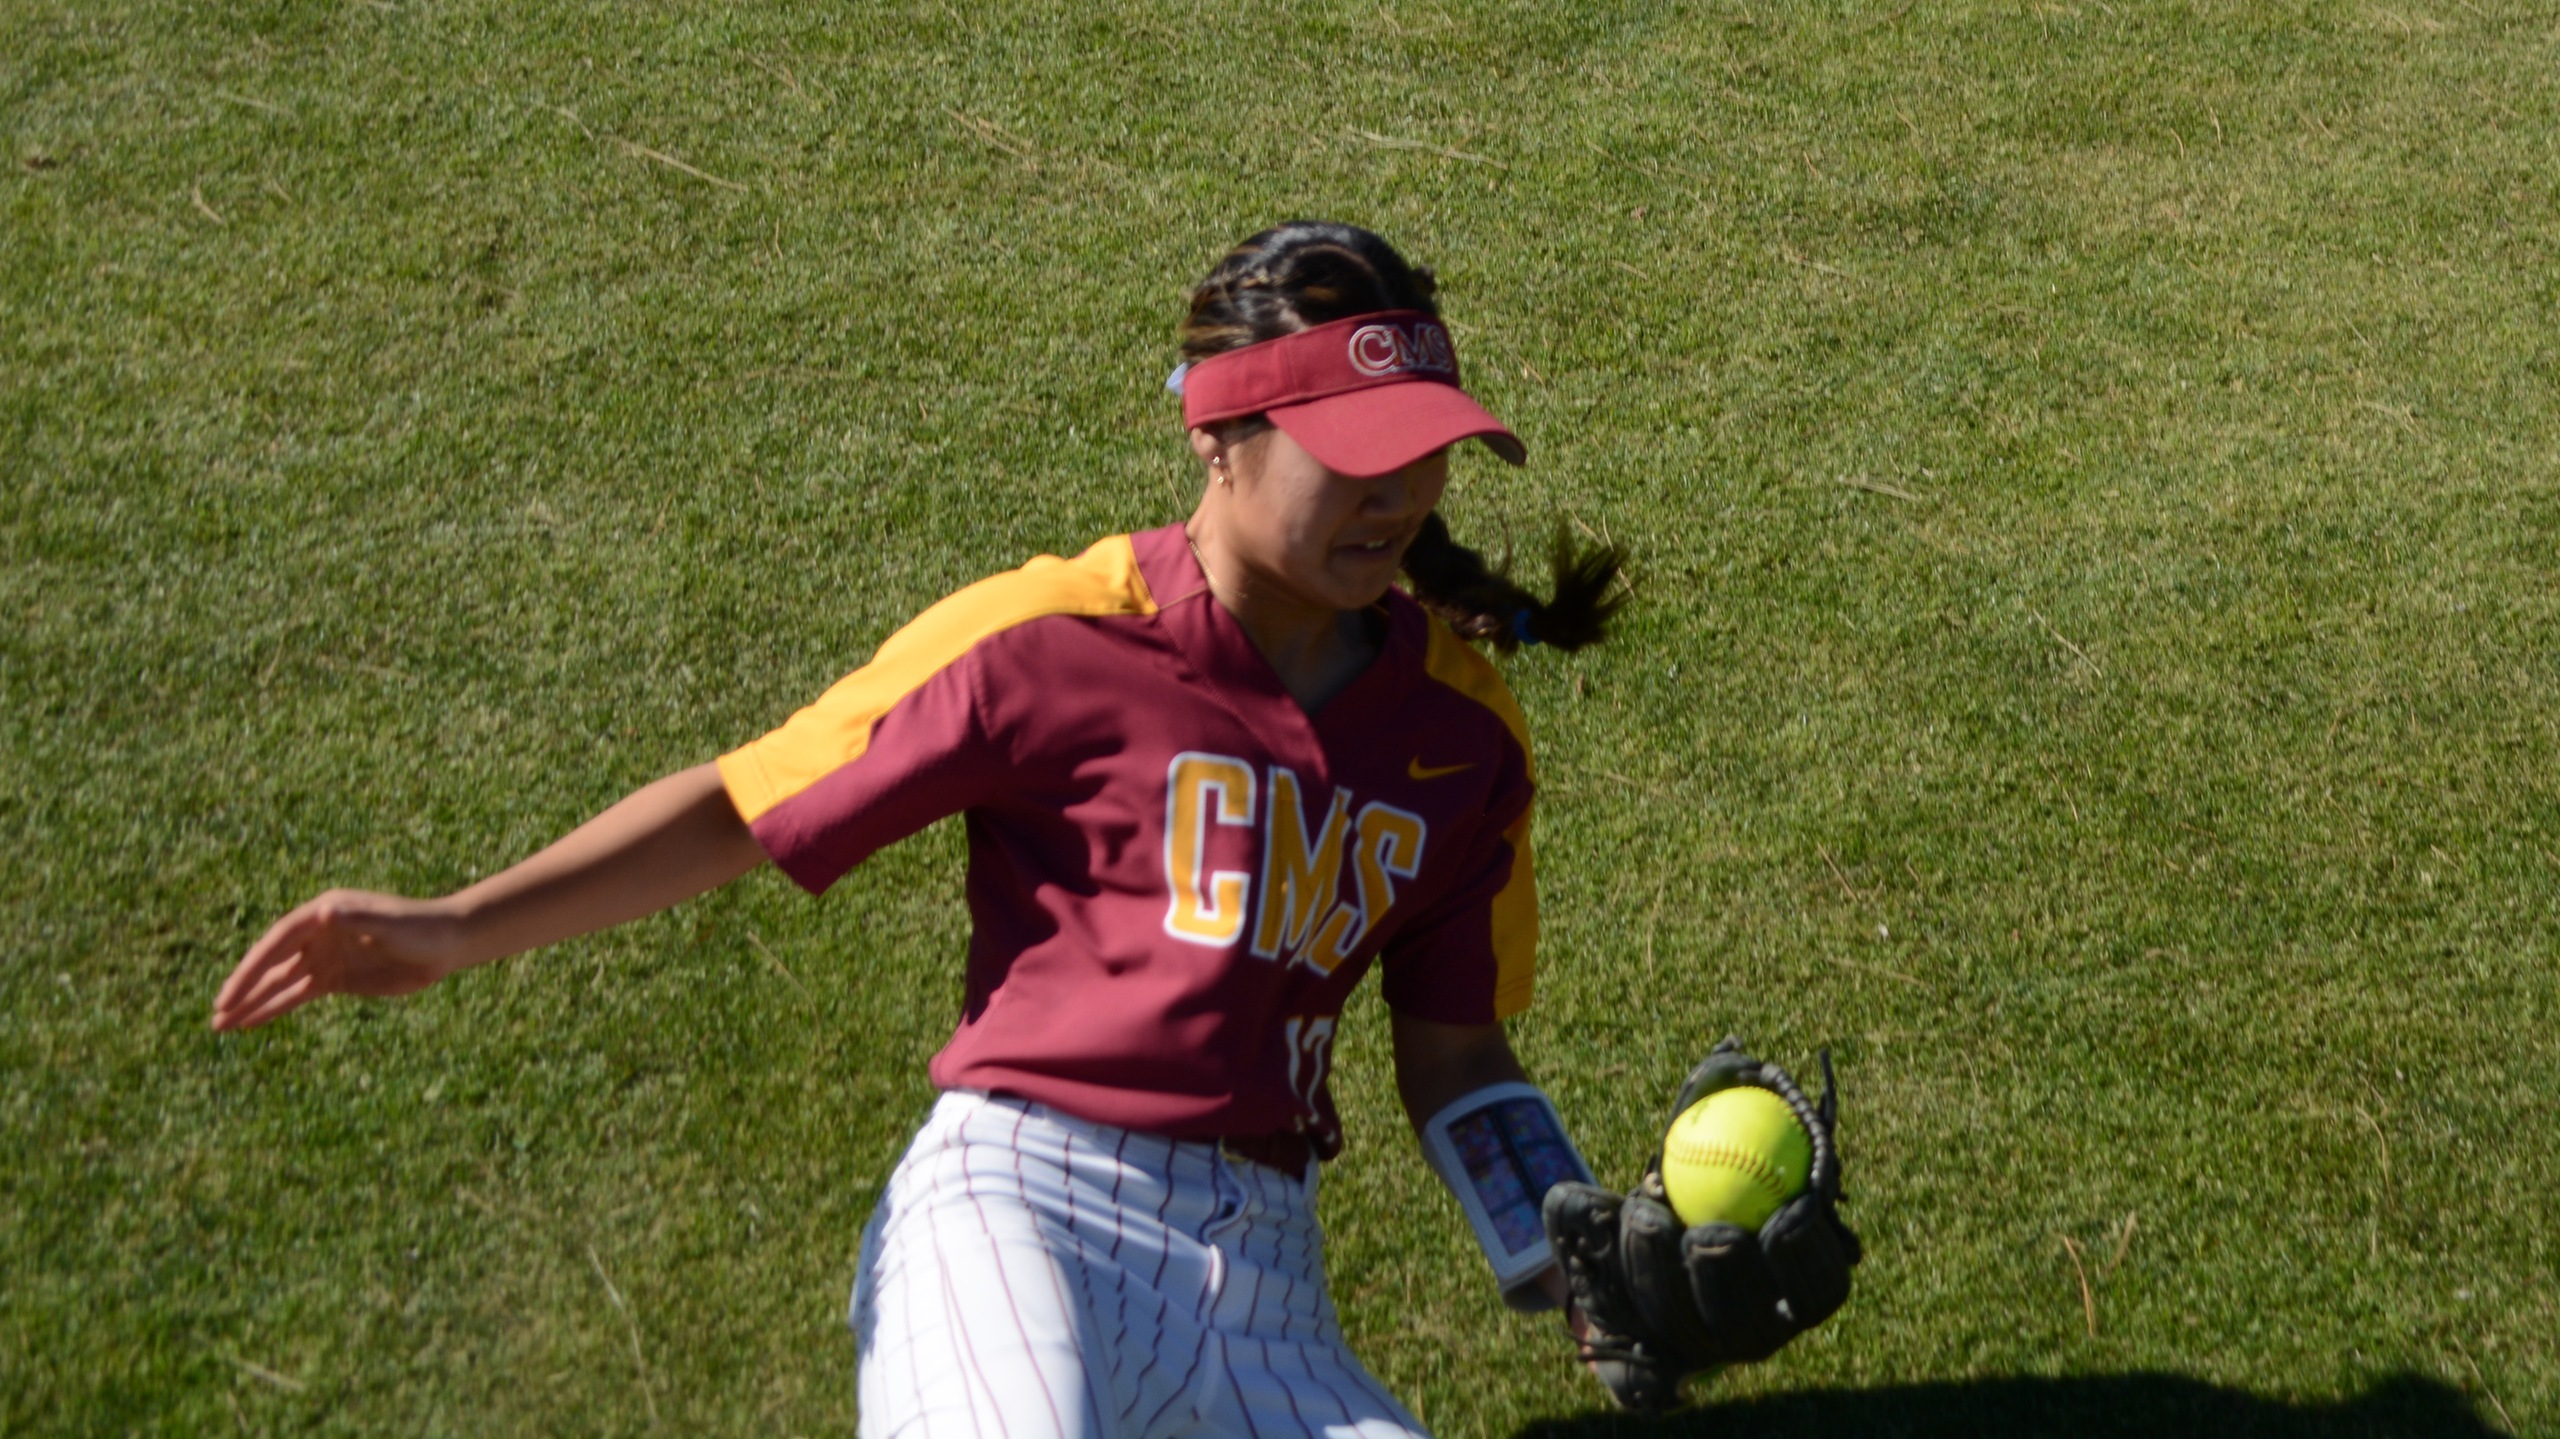 Emma Suh slides to make a catch in foul territory during the opener